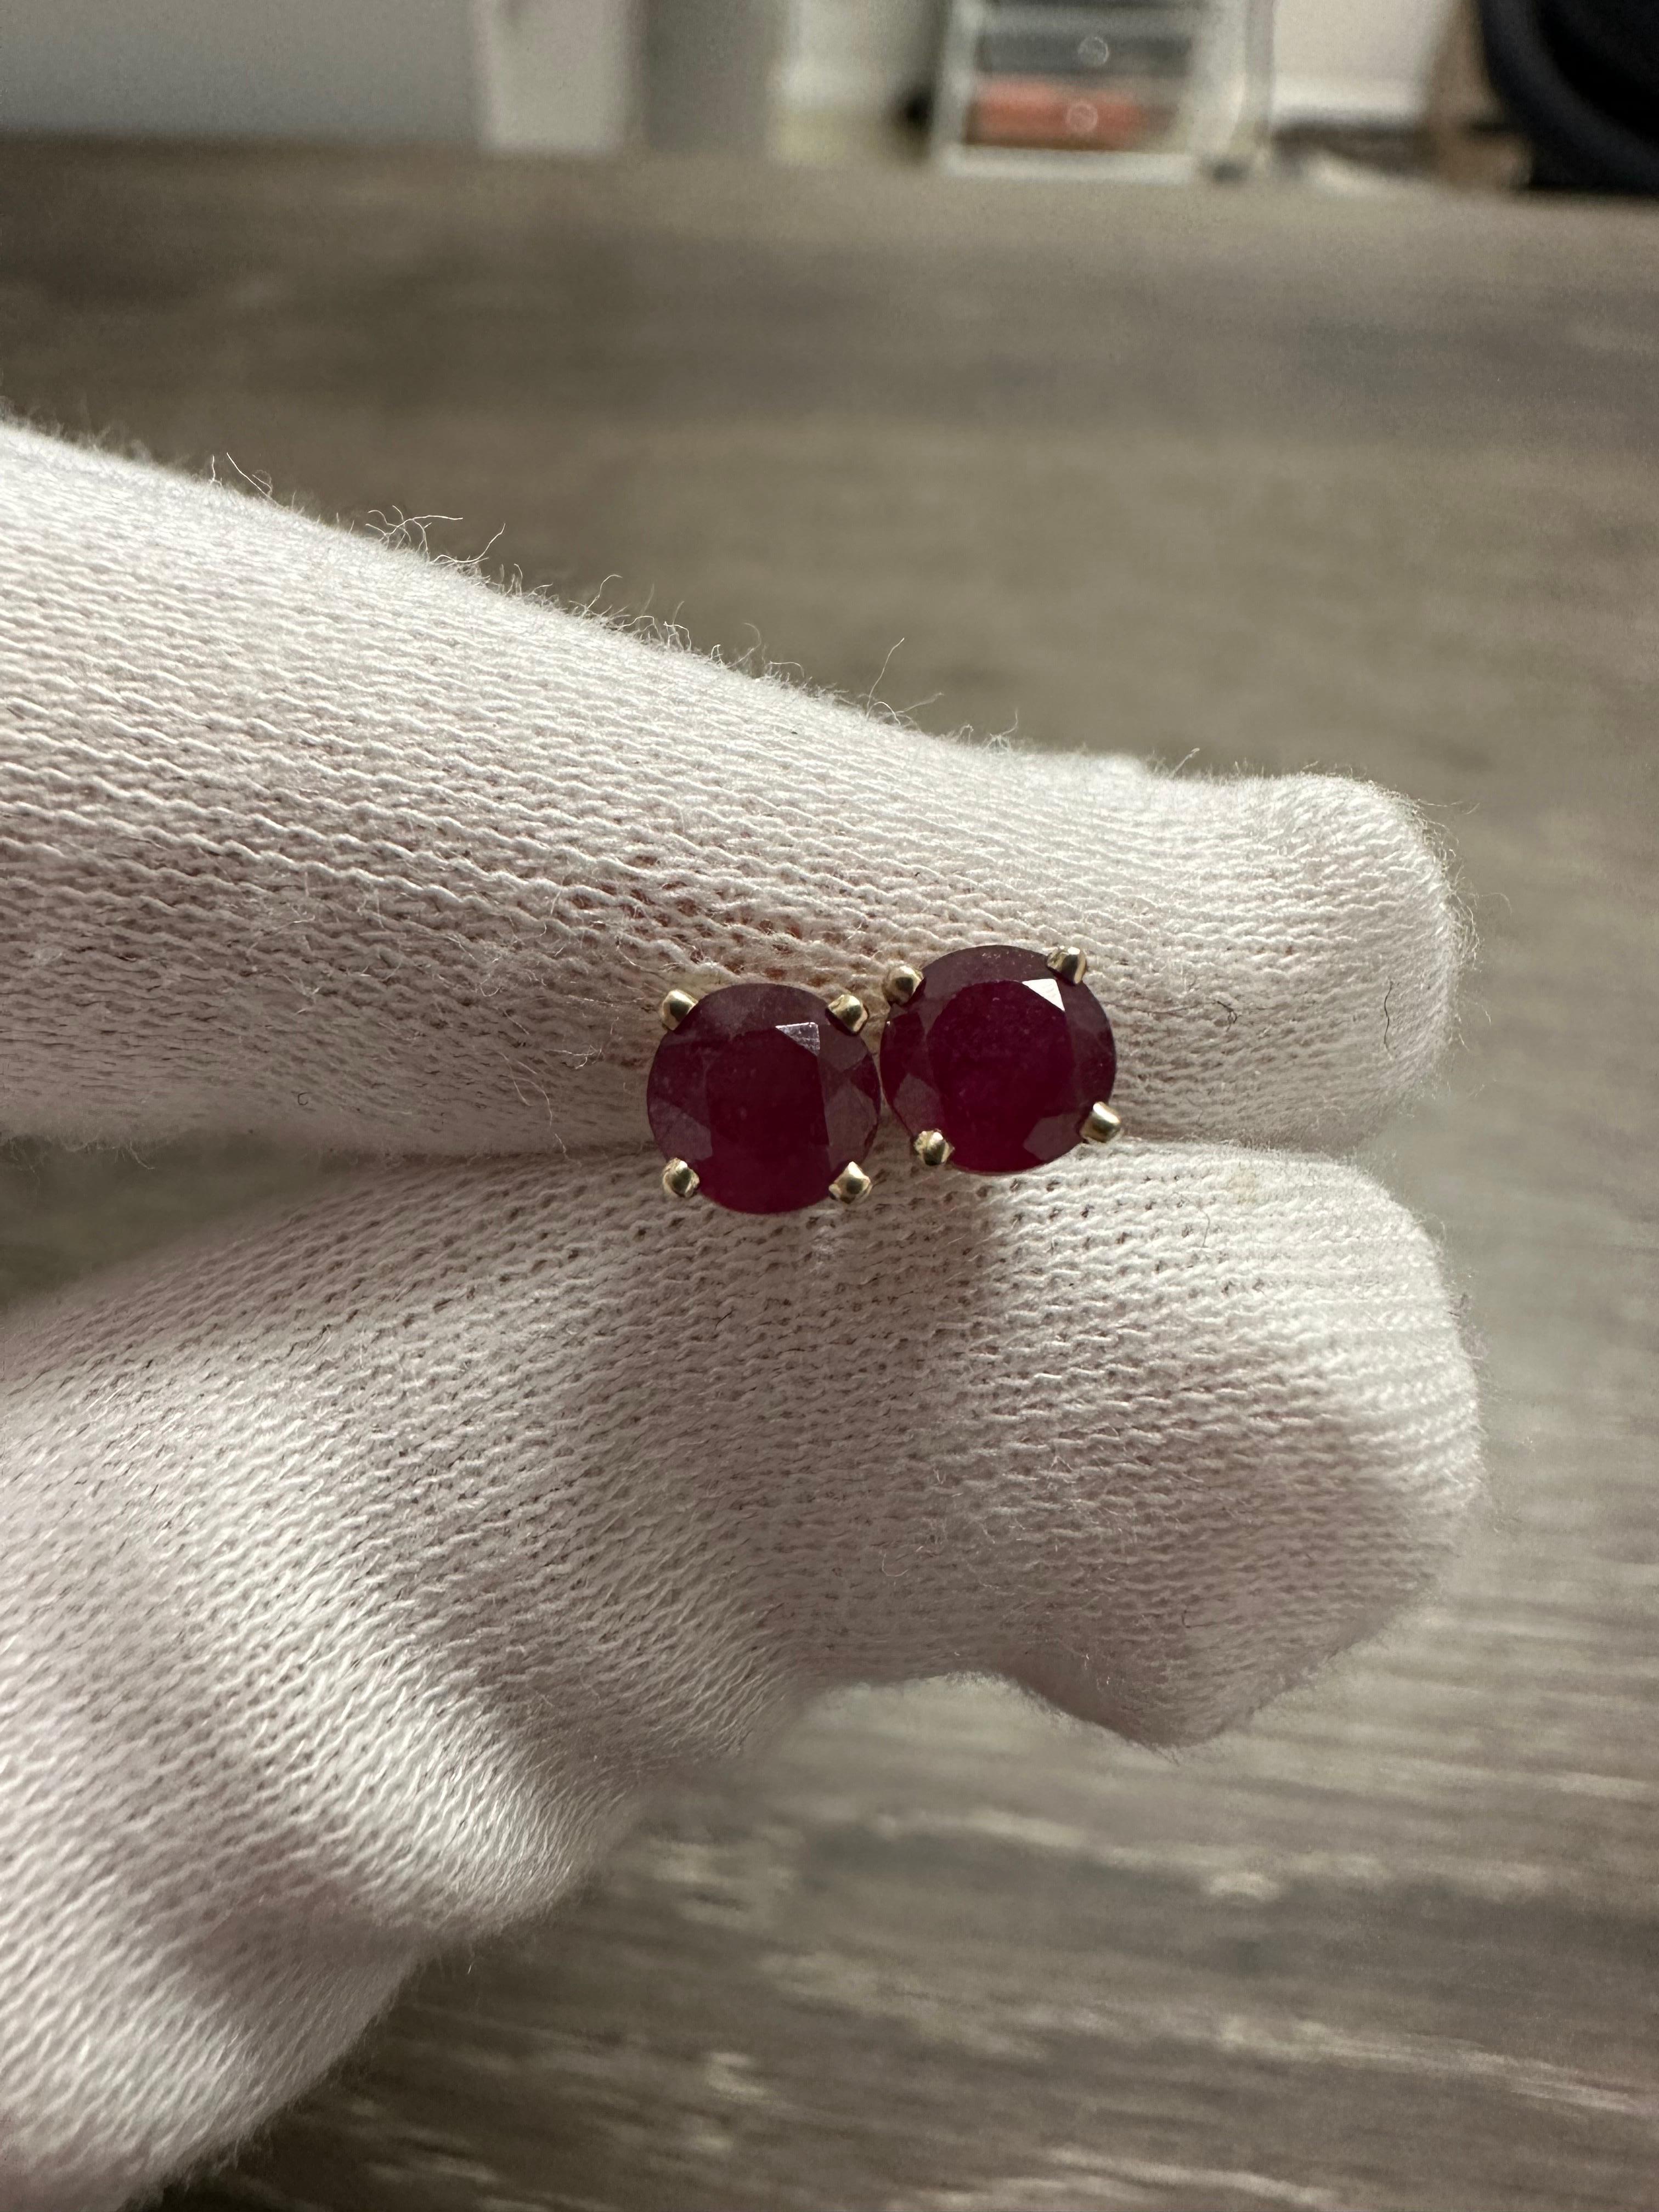 Certified natural rubies 5mm size set in 14KT yellow gold, nice wine color in rubies slightly pinkish red.
Certificate of authenticity comes with purchase!

ABOUT US
We are a family-owned business. Our studio in located in the heart of Boca Raton at